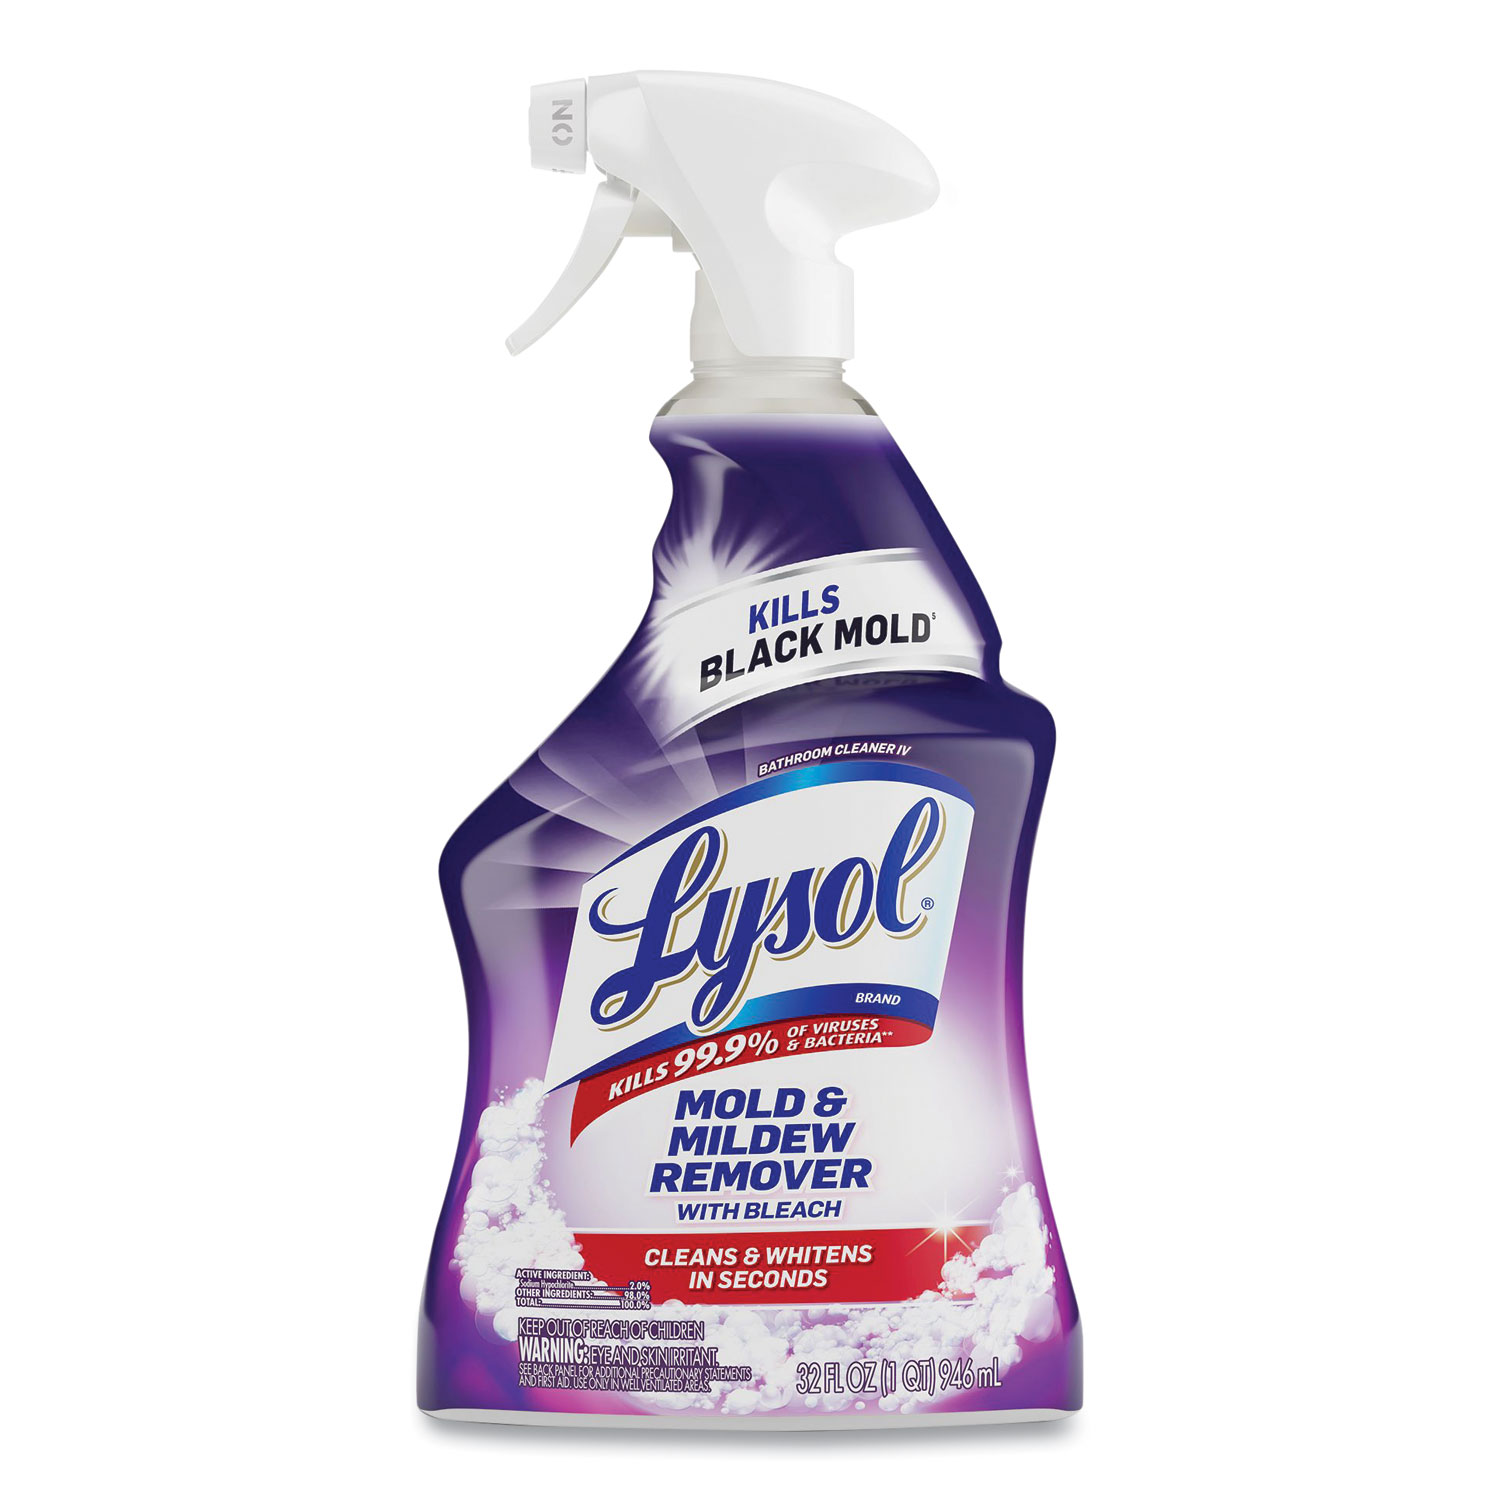 4) 1-Gallon Bottles of Lysol Heavy Duty Bathroom Cleaner and (4) 1